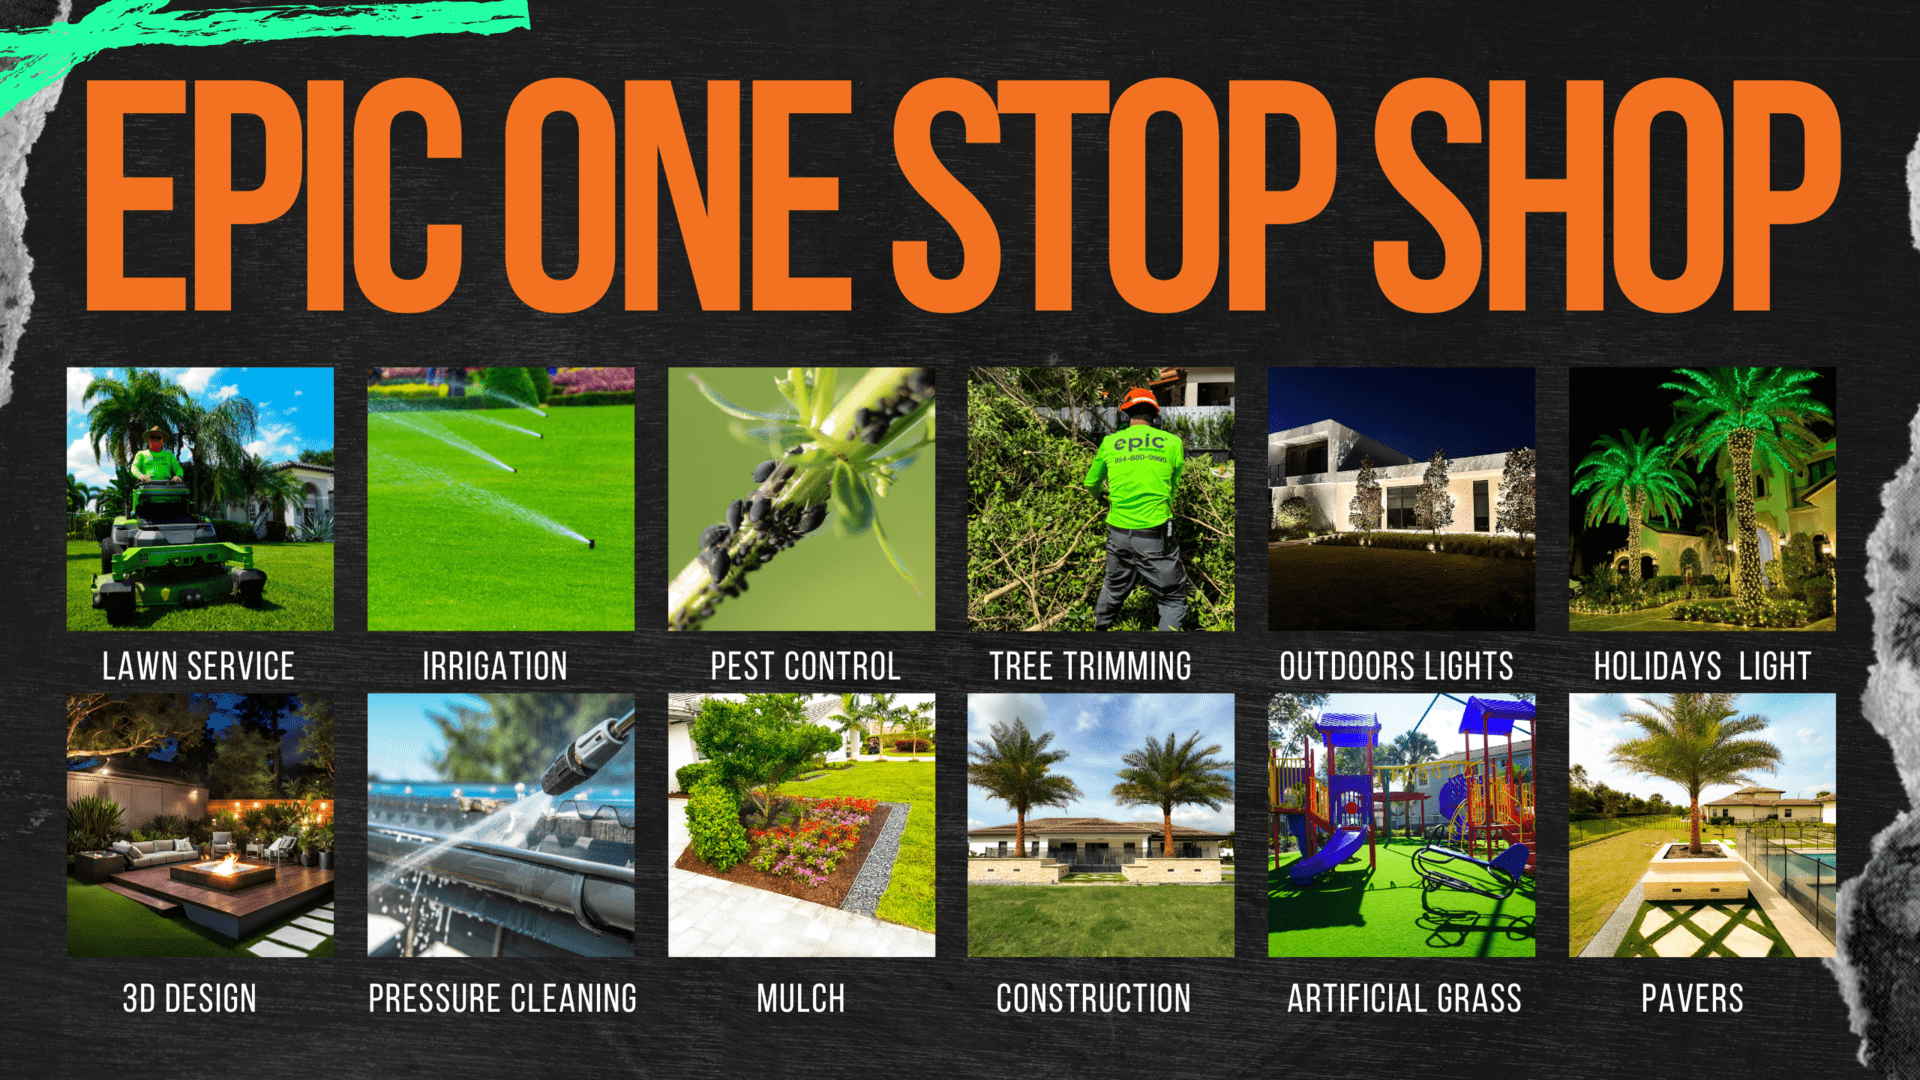 EPIC ONE STOP SHOP. Lawn service, Irrigation, Pest control, Tree trimming, Outdoors lights, Holiday light, 3D design, Pressure cleaning, Mulch, Contruction, Artificial grass & Pavers.